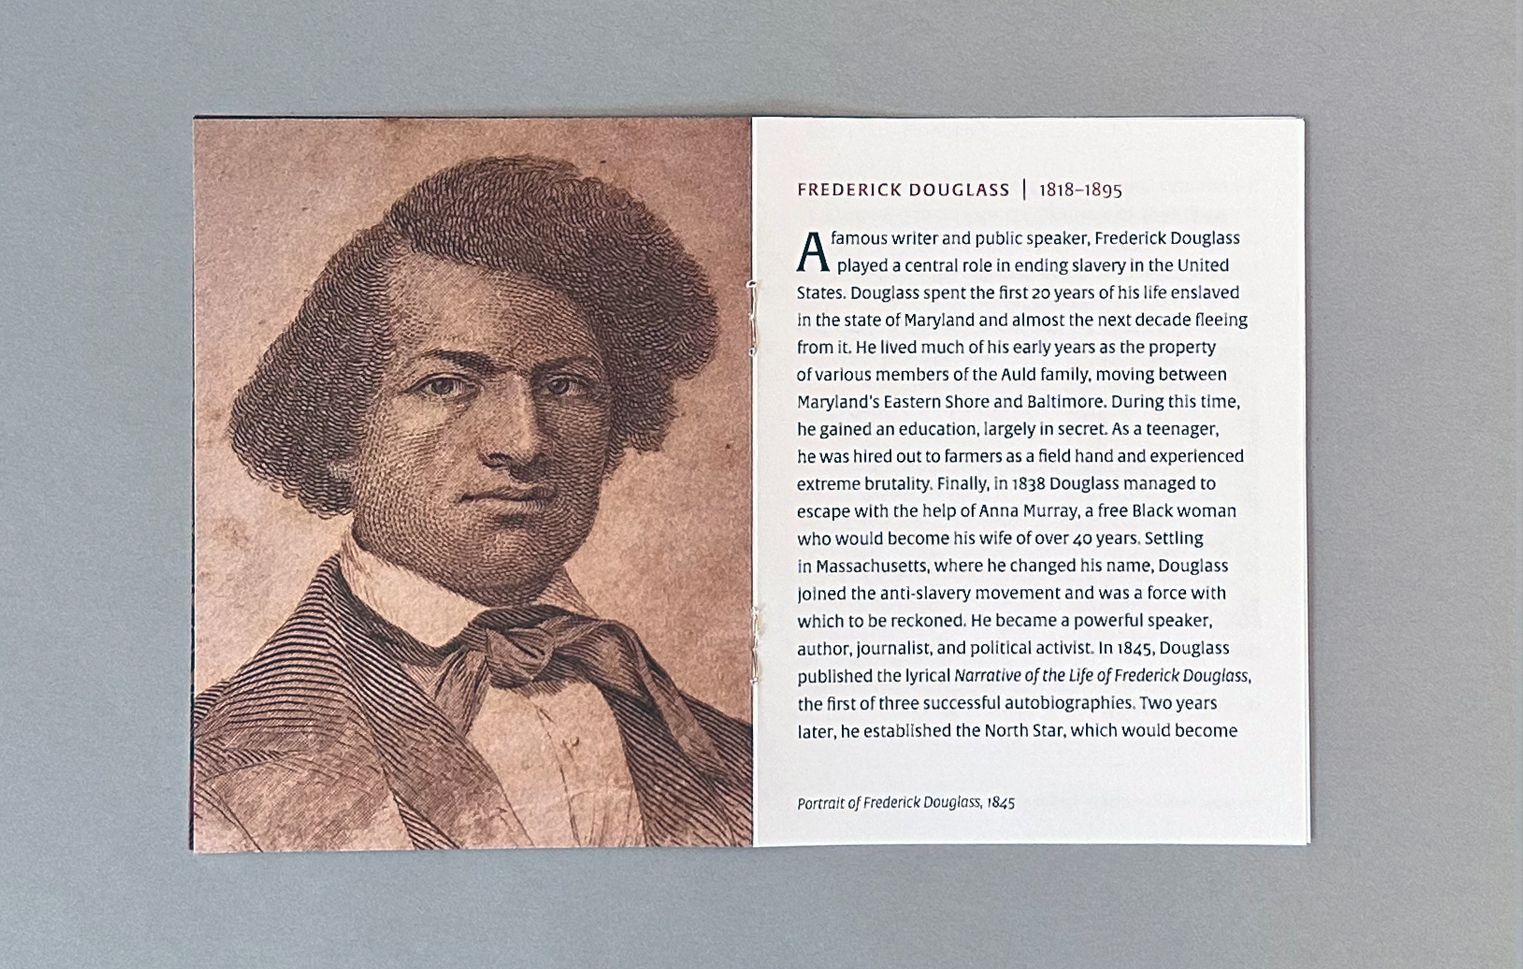 This booklet contains a brief biography of Frederick Douglass.